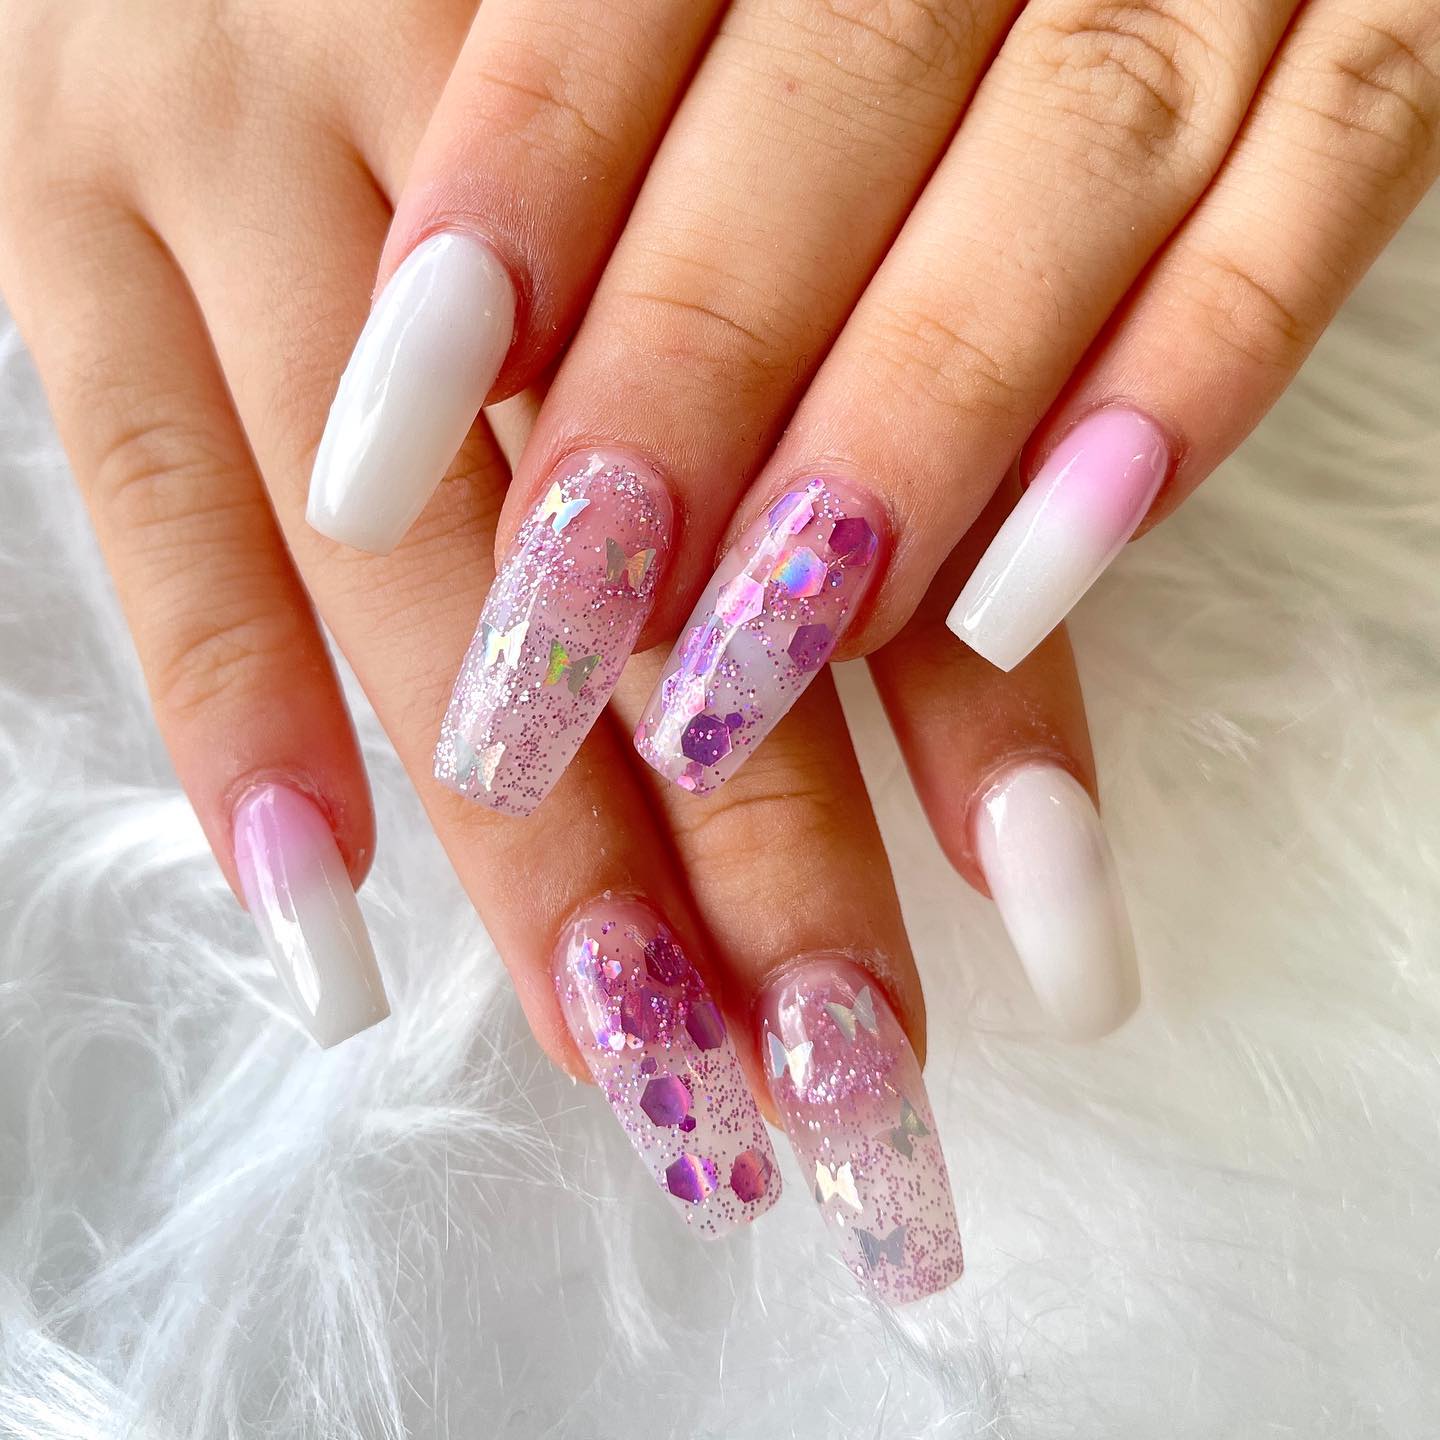 Pink and White Nails with Silver Butterflies